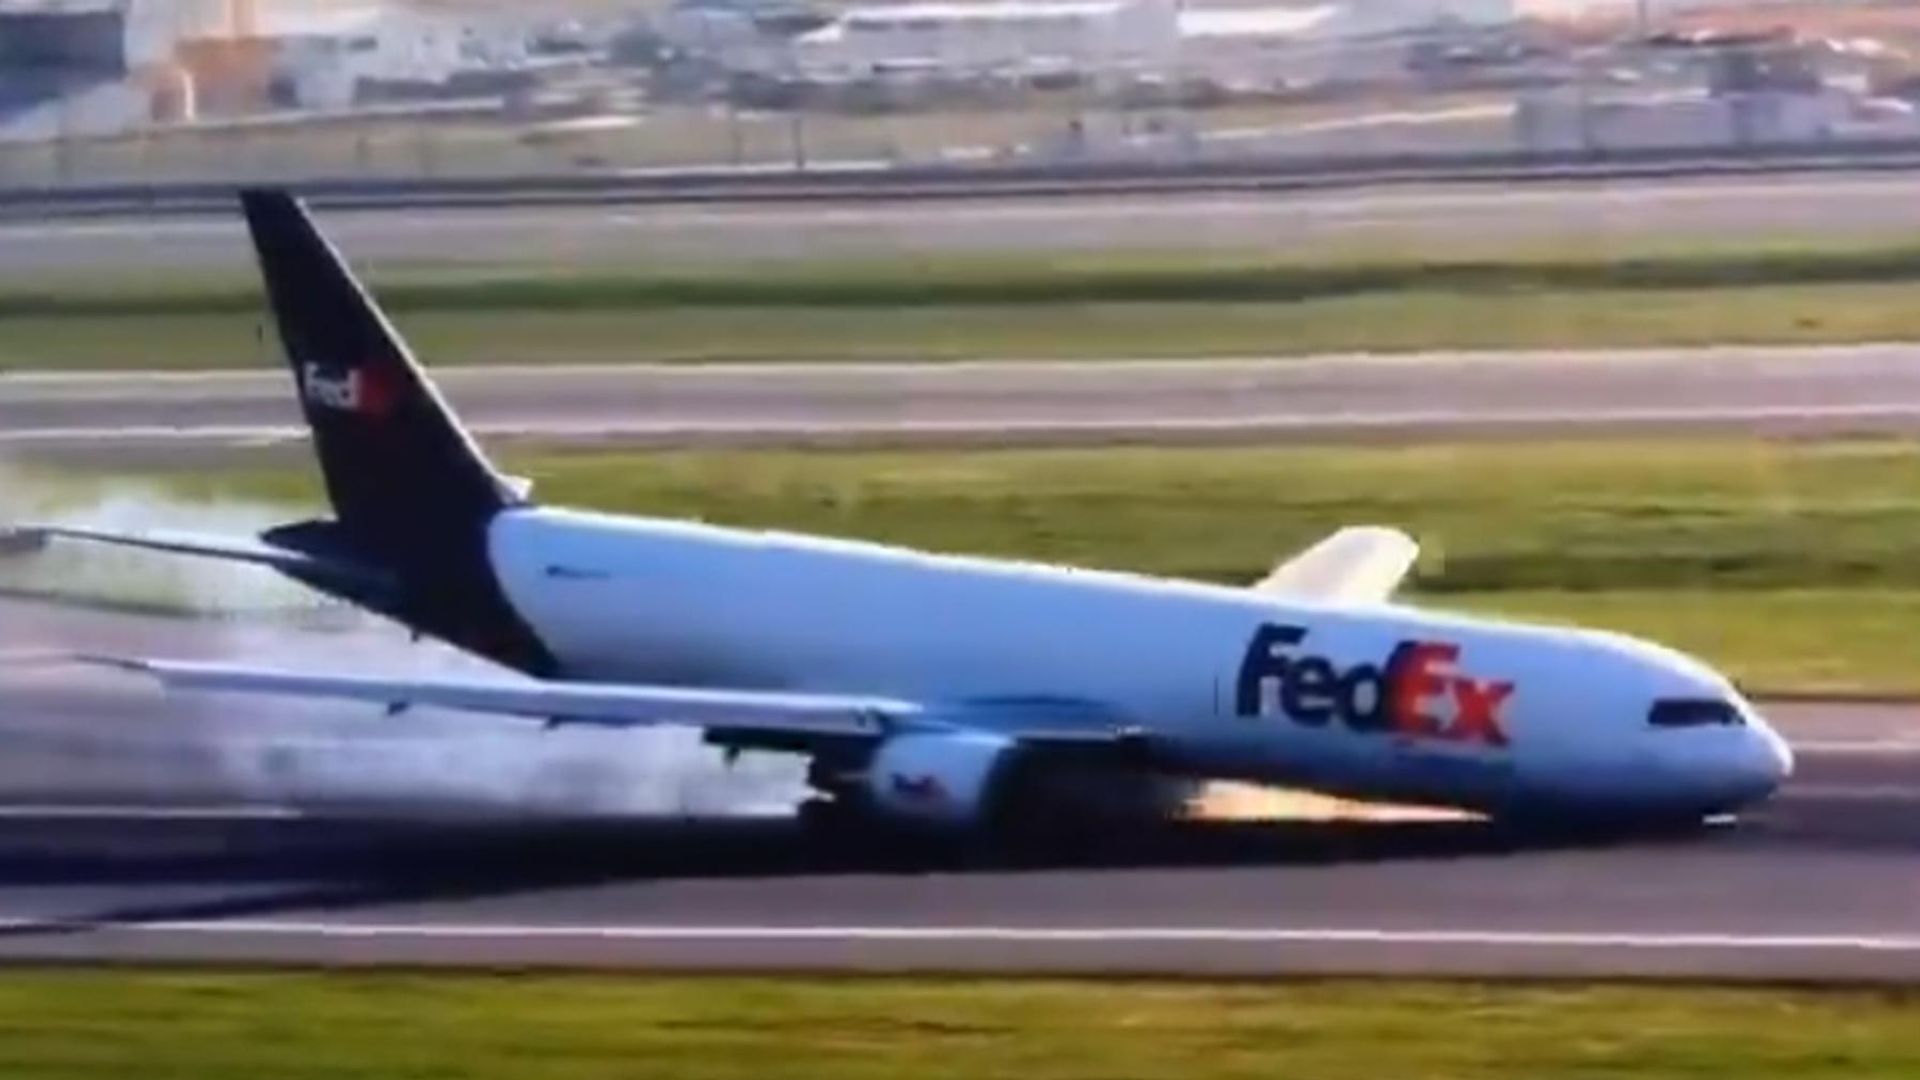 Front of plane skids along runway as it touches down without front landing gear